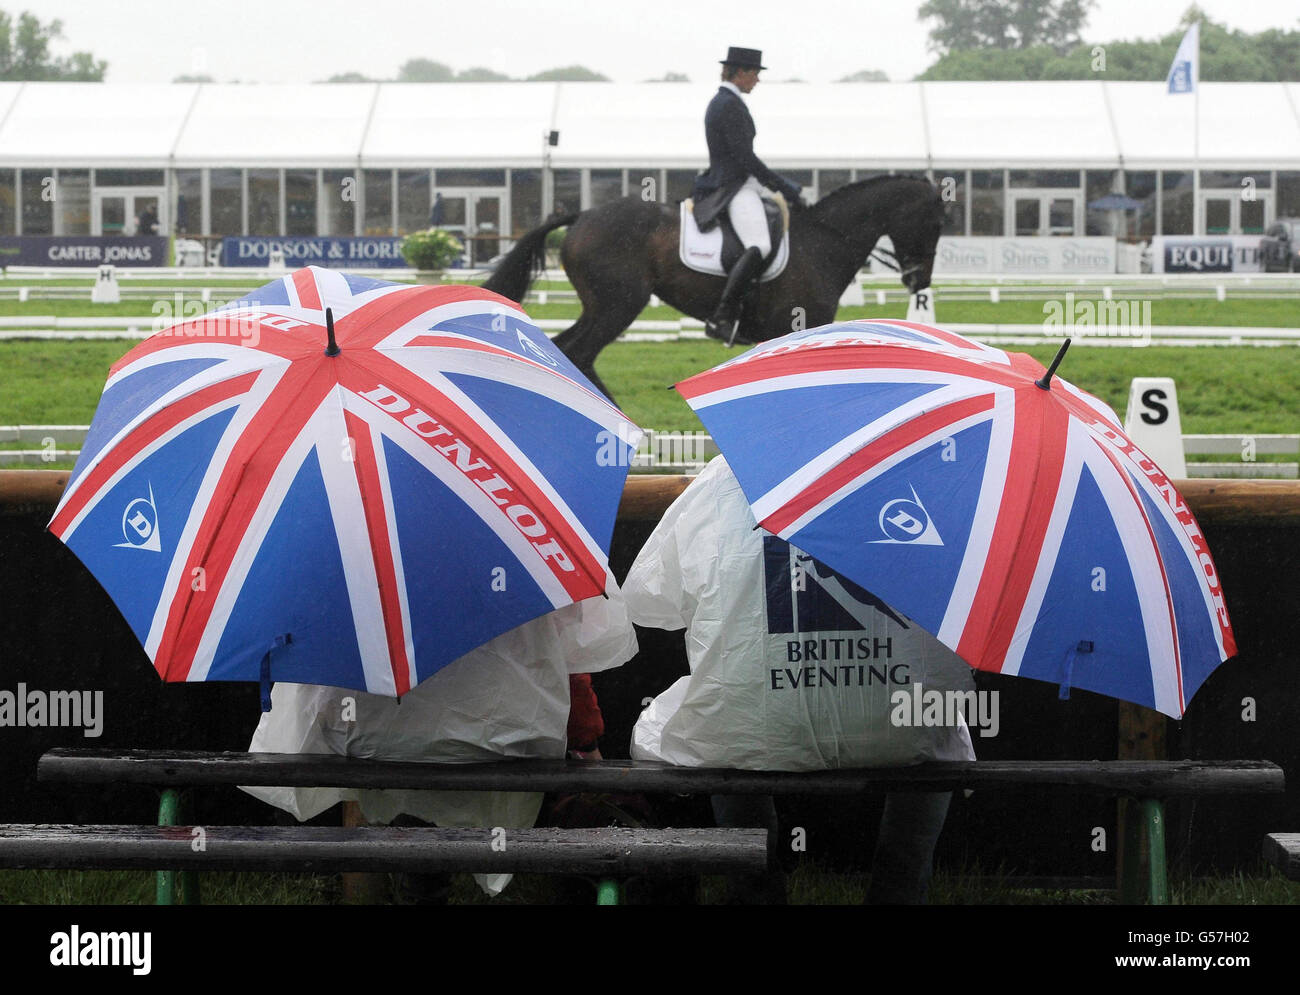 Spectators brave the rain to watch the Dressage event during the Bramham International Horse Trials at Bramham Park, Wetherby. Stock Photo